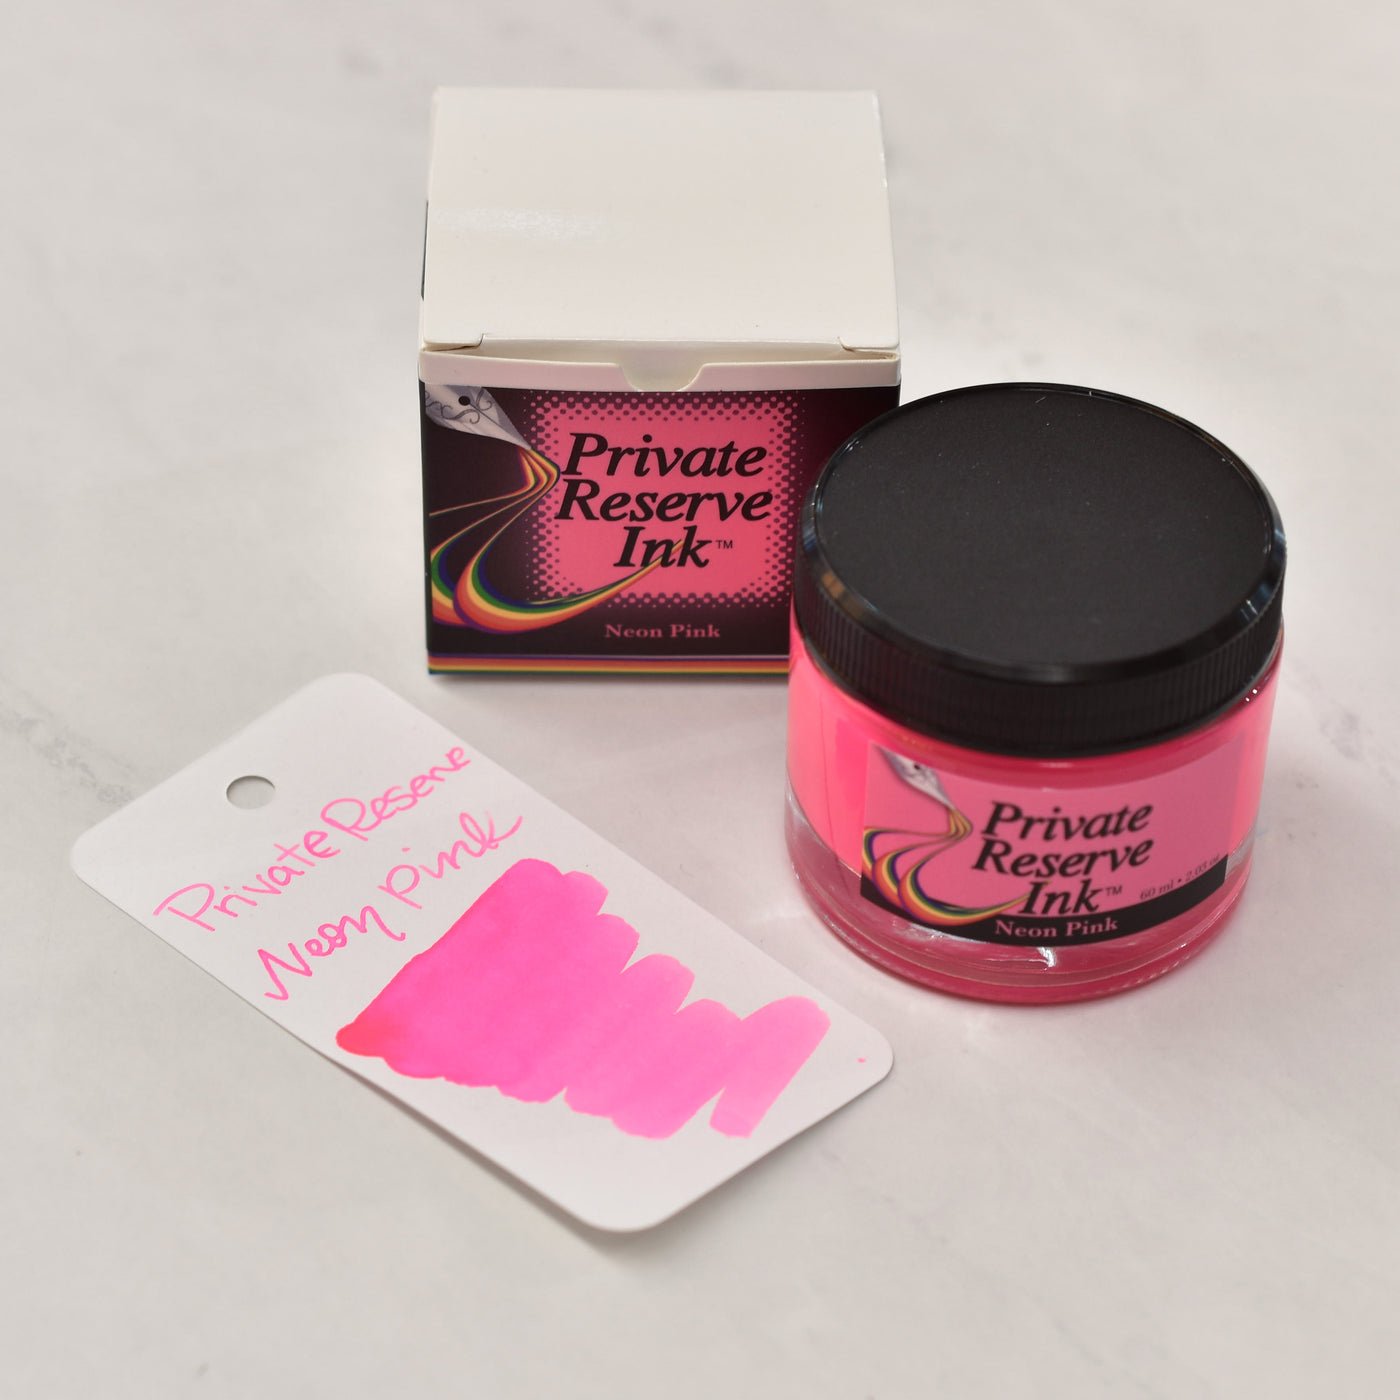 Private Reserve Neon Pink Ink Bottle